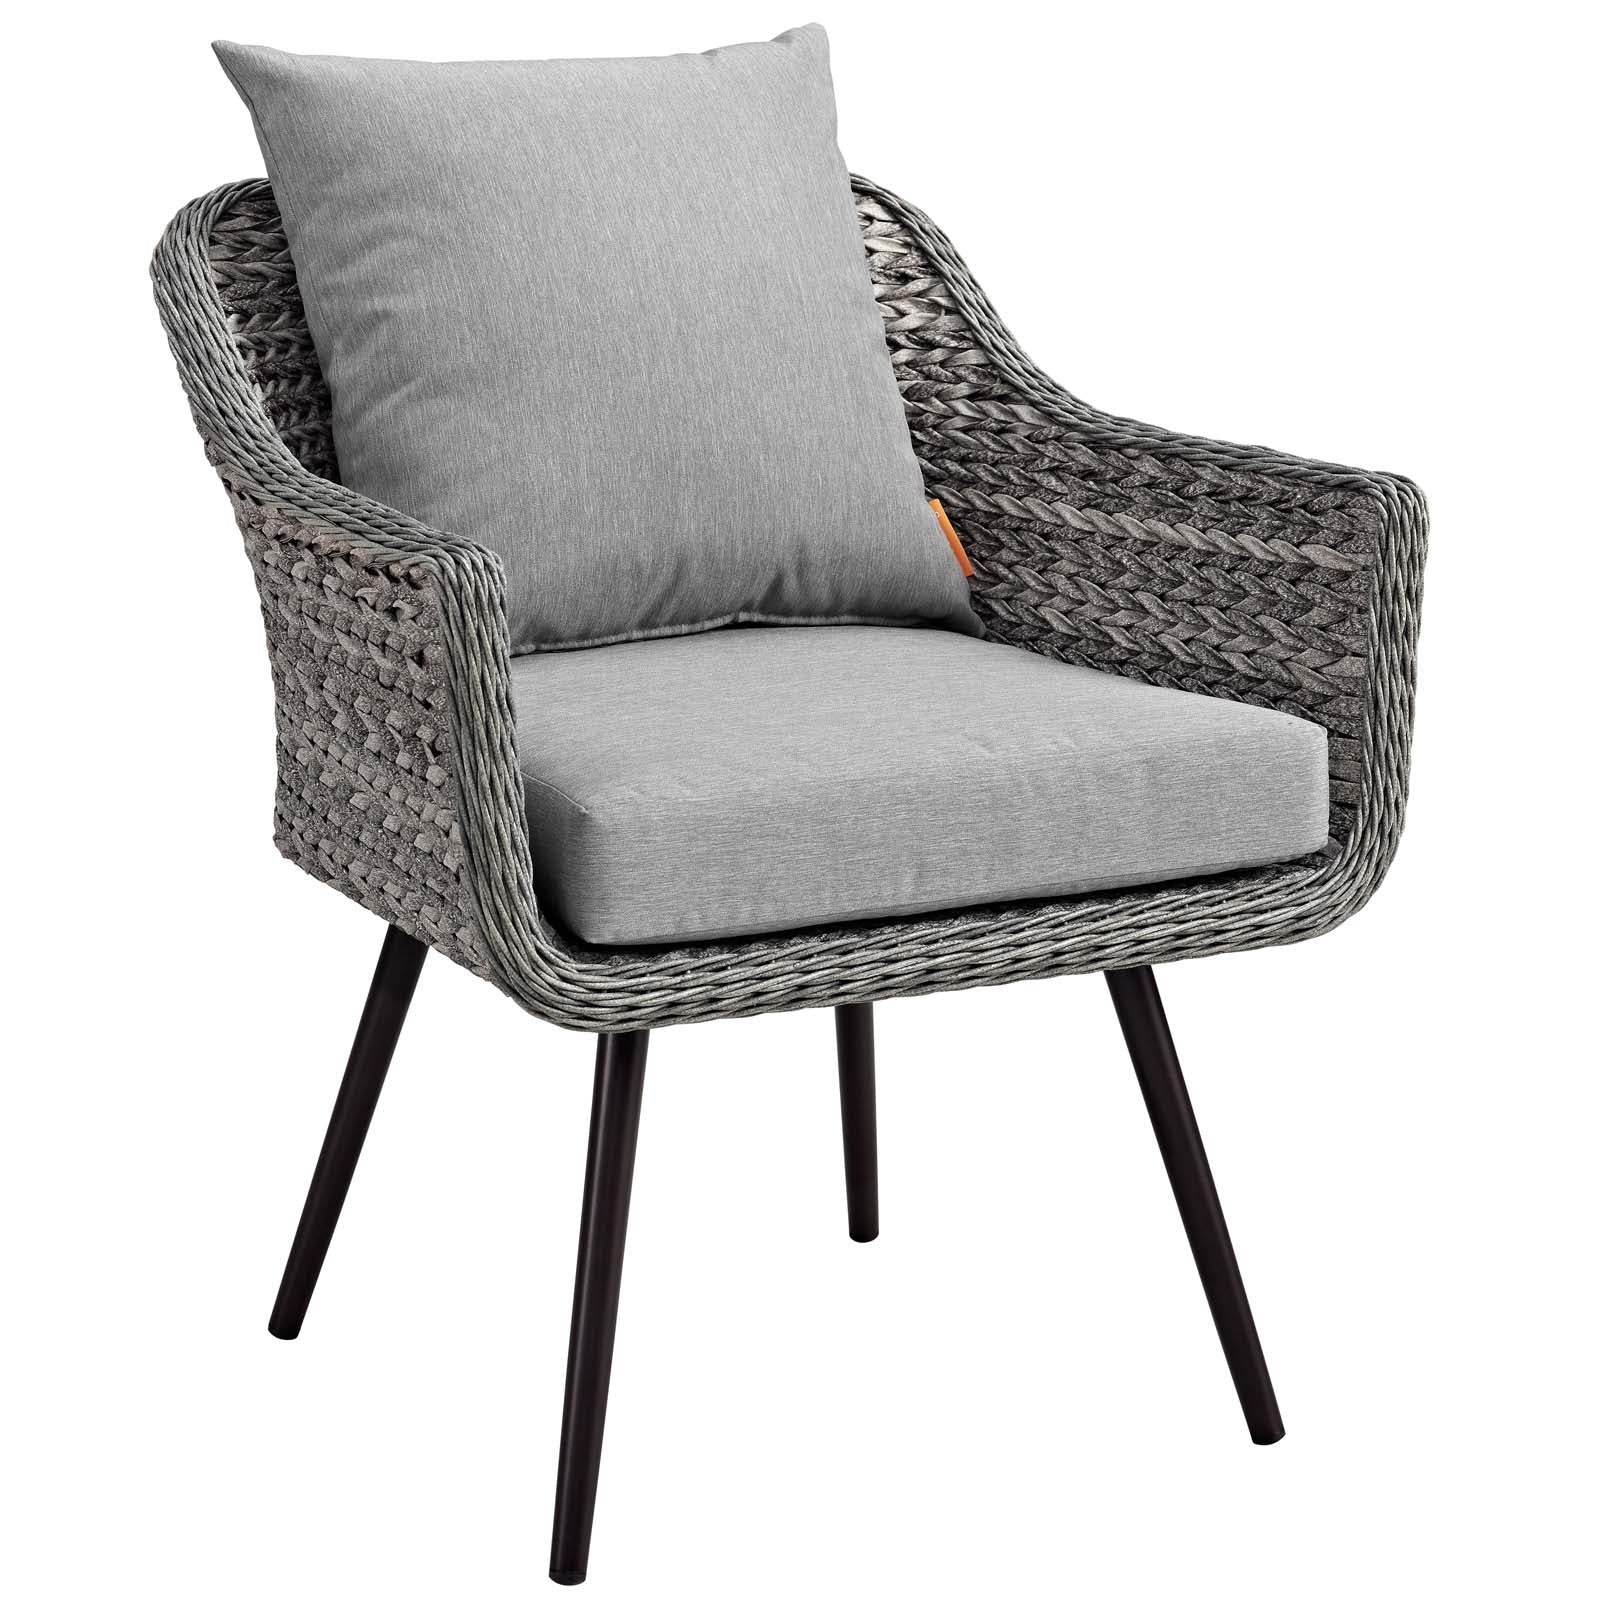 Endeavor 4 Piece Outdoor Patio Wicker Rattan Loveseat Armchair and Coffee Table Set - East Shore Modern Home Furnishings